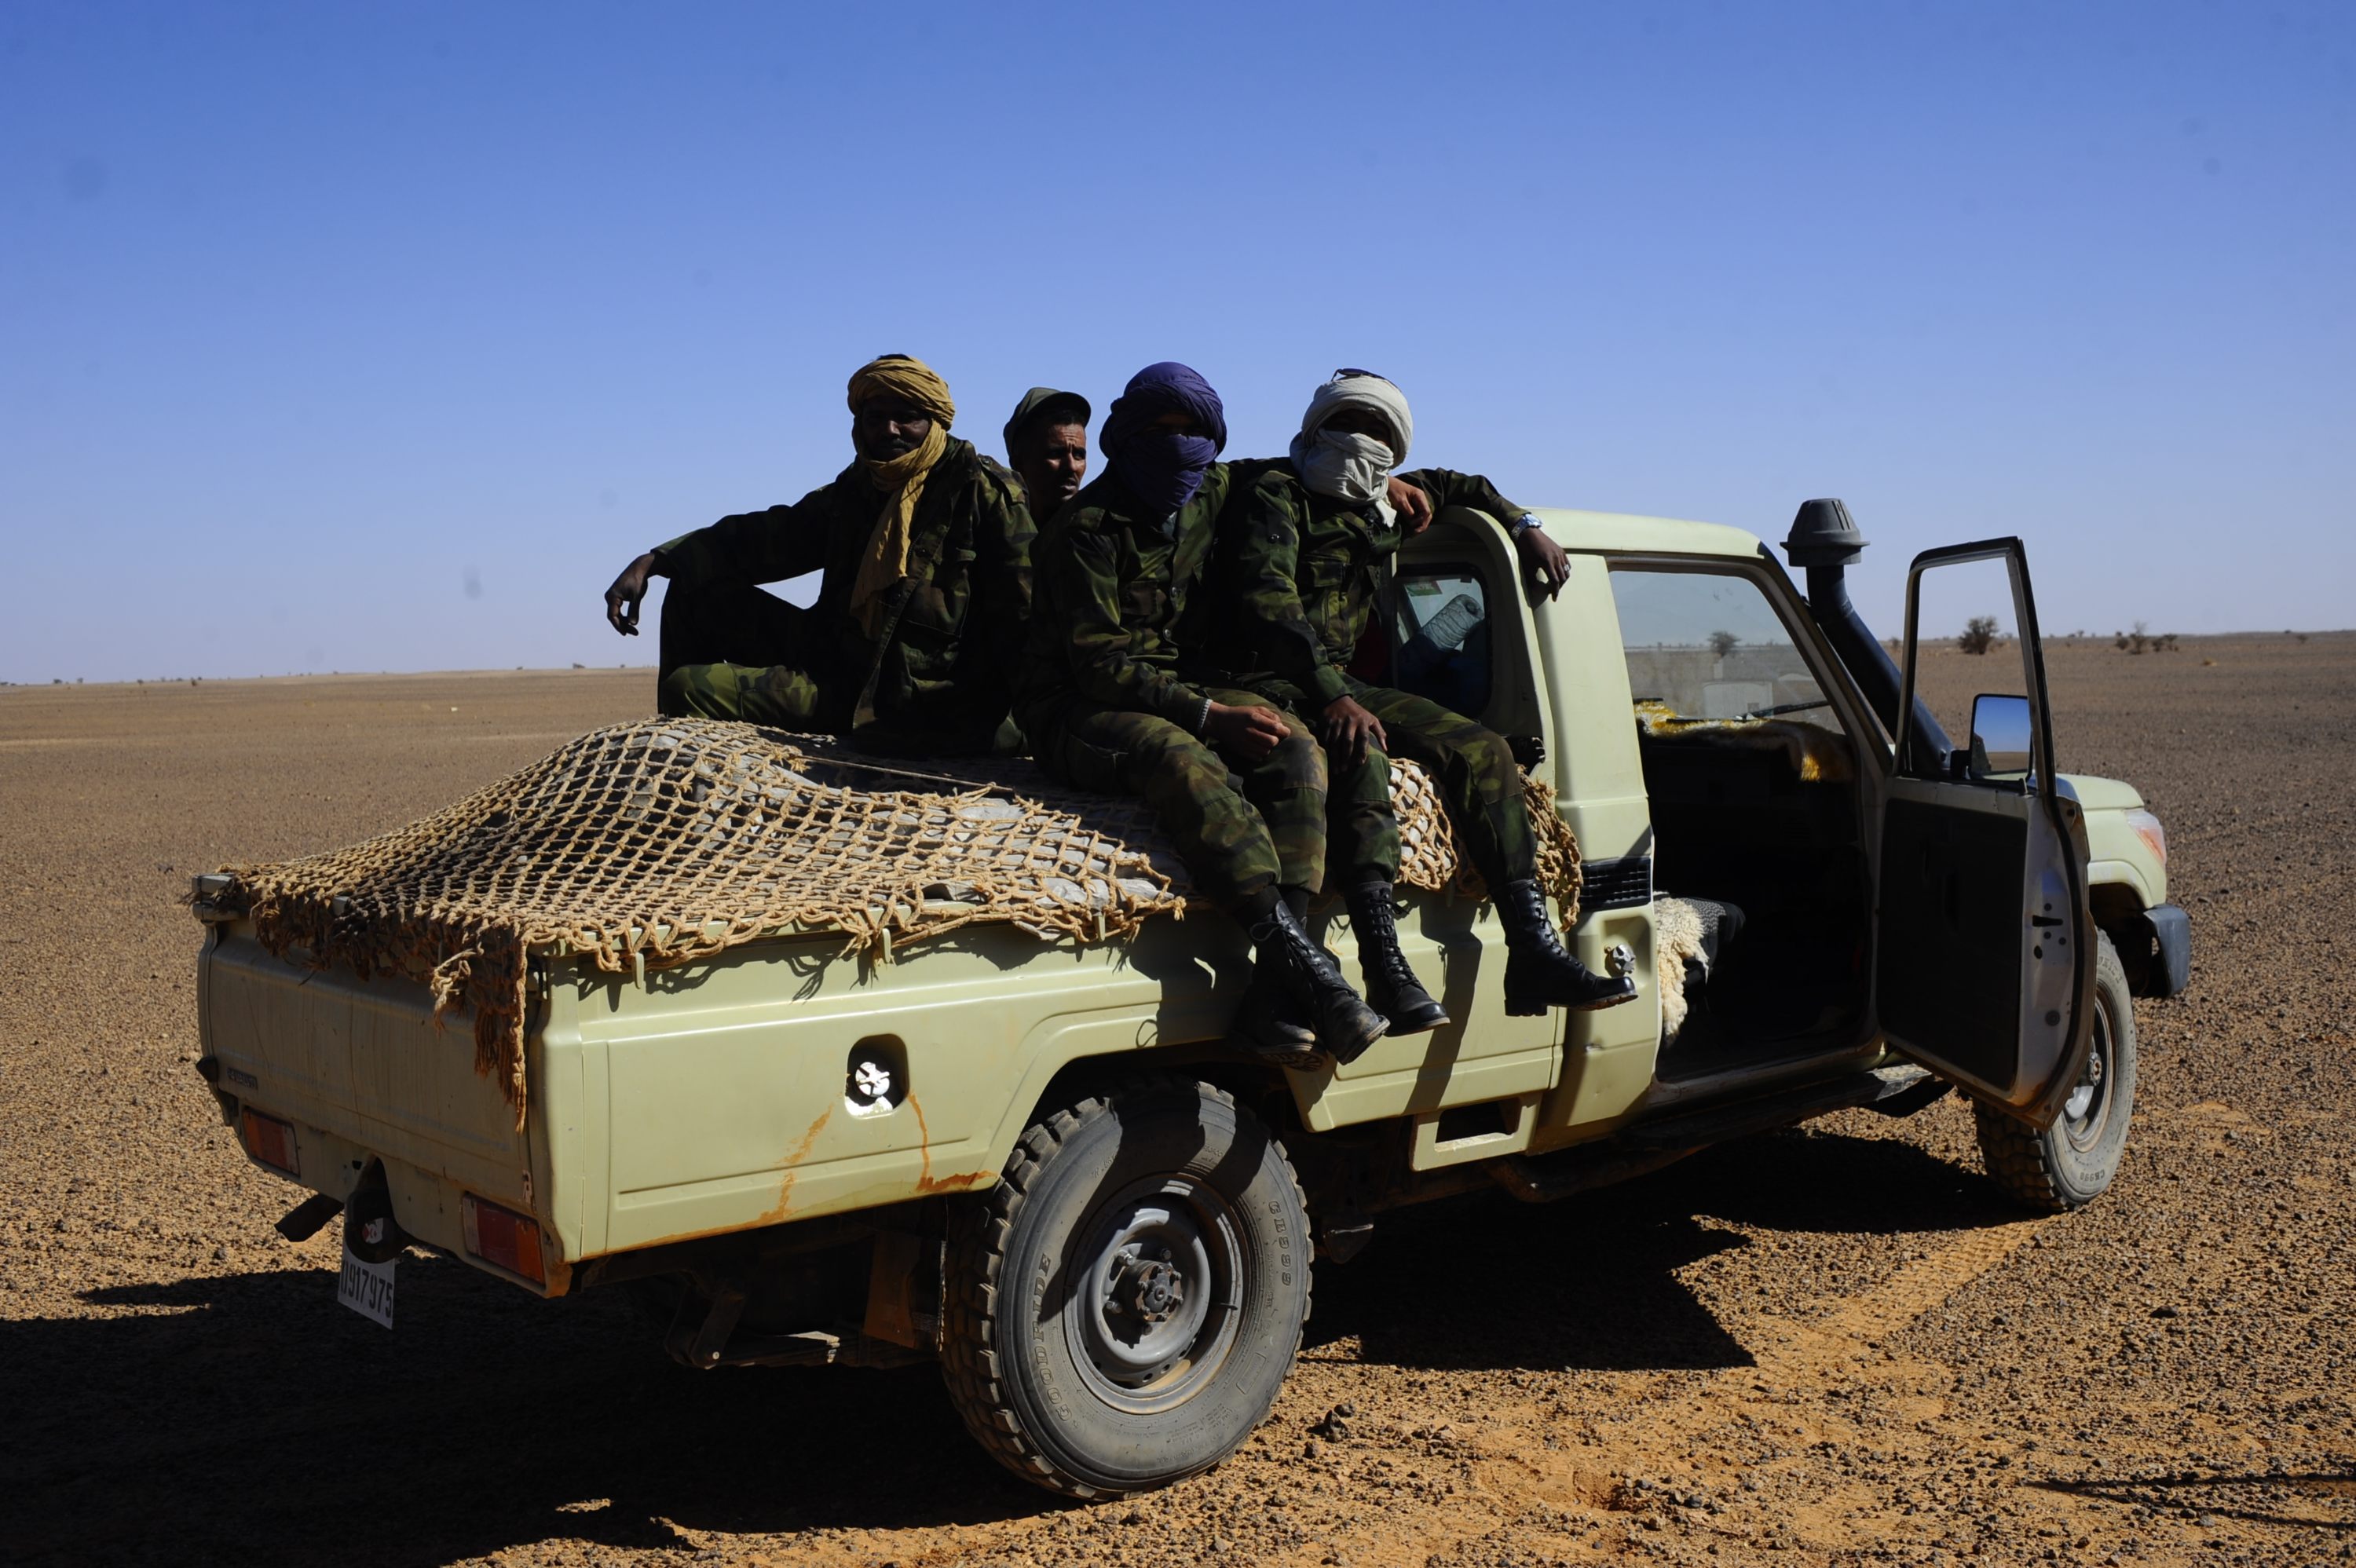 Members of the Polisario sit on a pick-up truck in the Western Sahara in 2014 (MEE/Oscar Rickett)